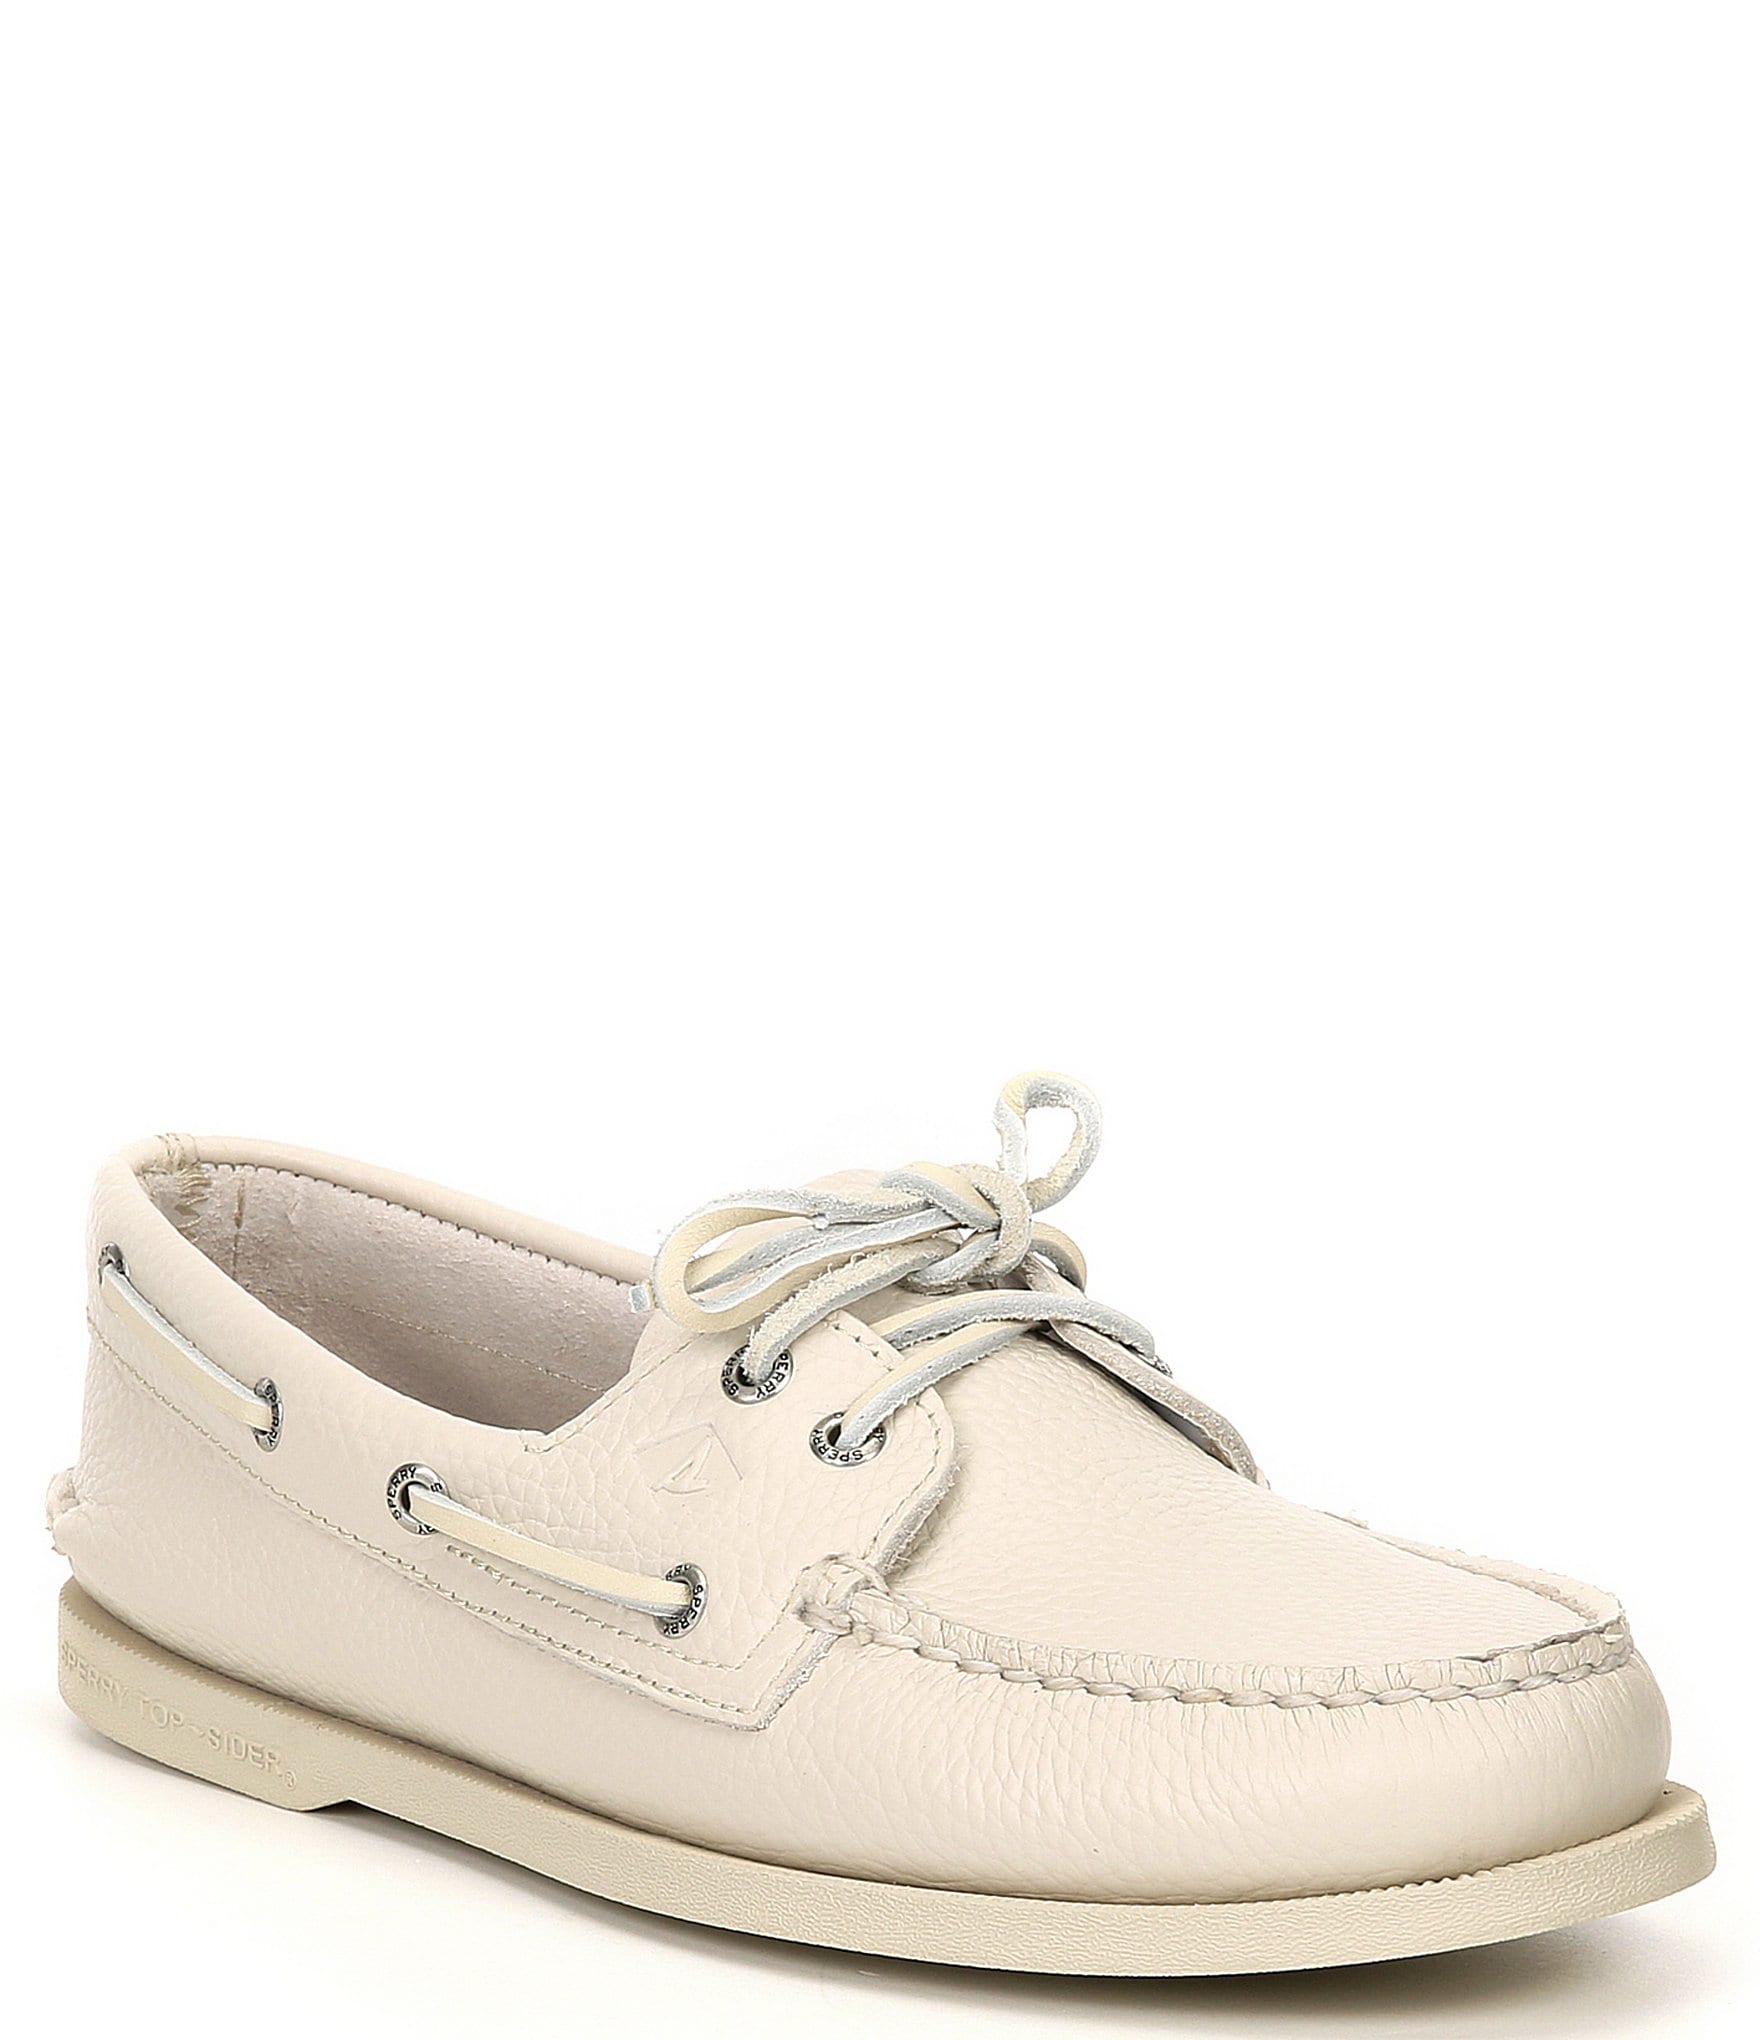 Sperry Men's Top-Sider Authentic Original 2-Eye Leather Boat Shoes Dillard's